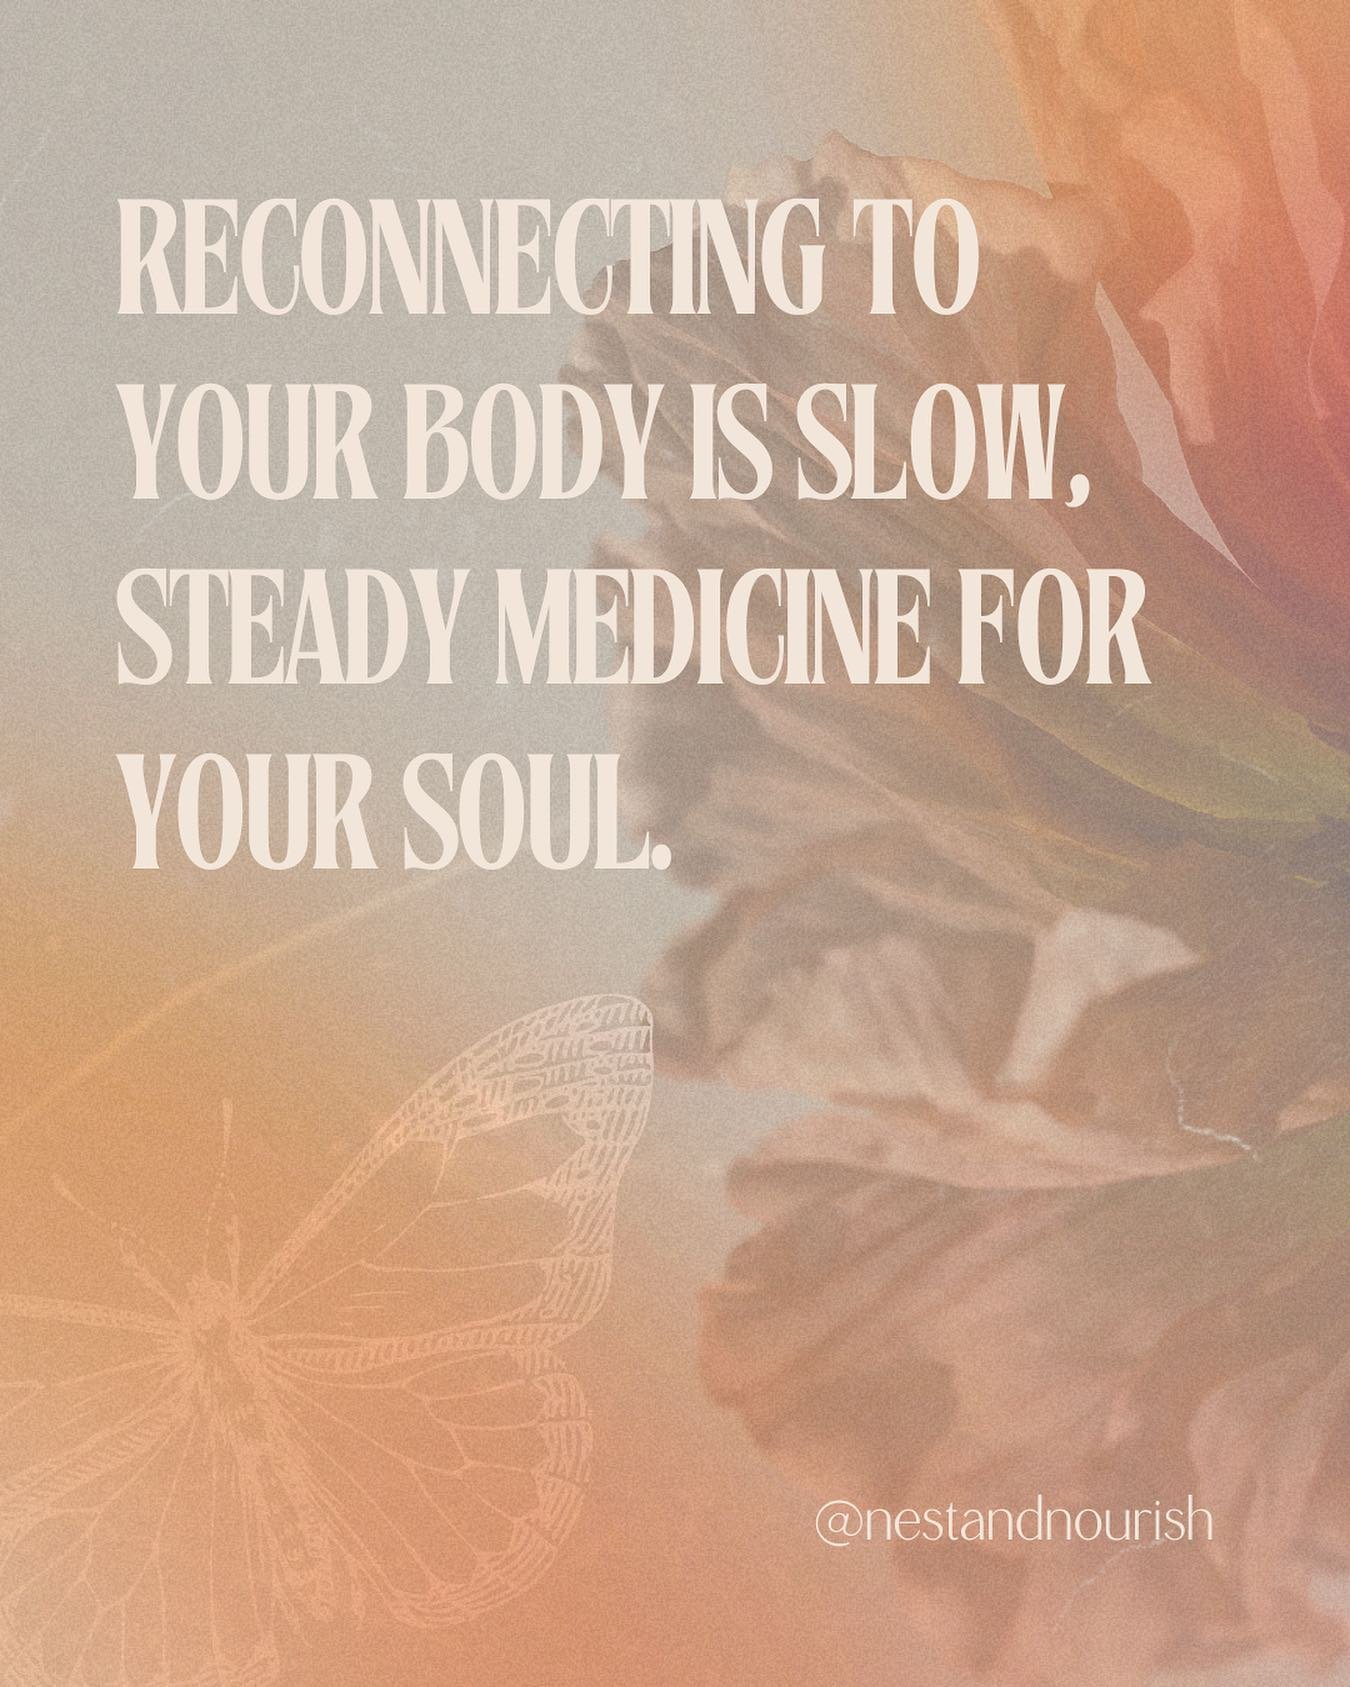 In our fast paced world all we want is quick fixes and instant results. But when it comes to healing trauma, reconnecting to your body and befriending your nervous system, the key is a sllloowwwww steady pace. Little sips of a new experience at a tim